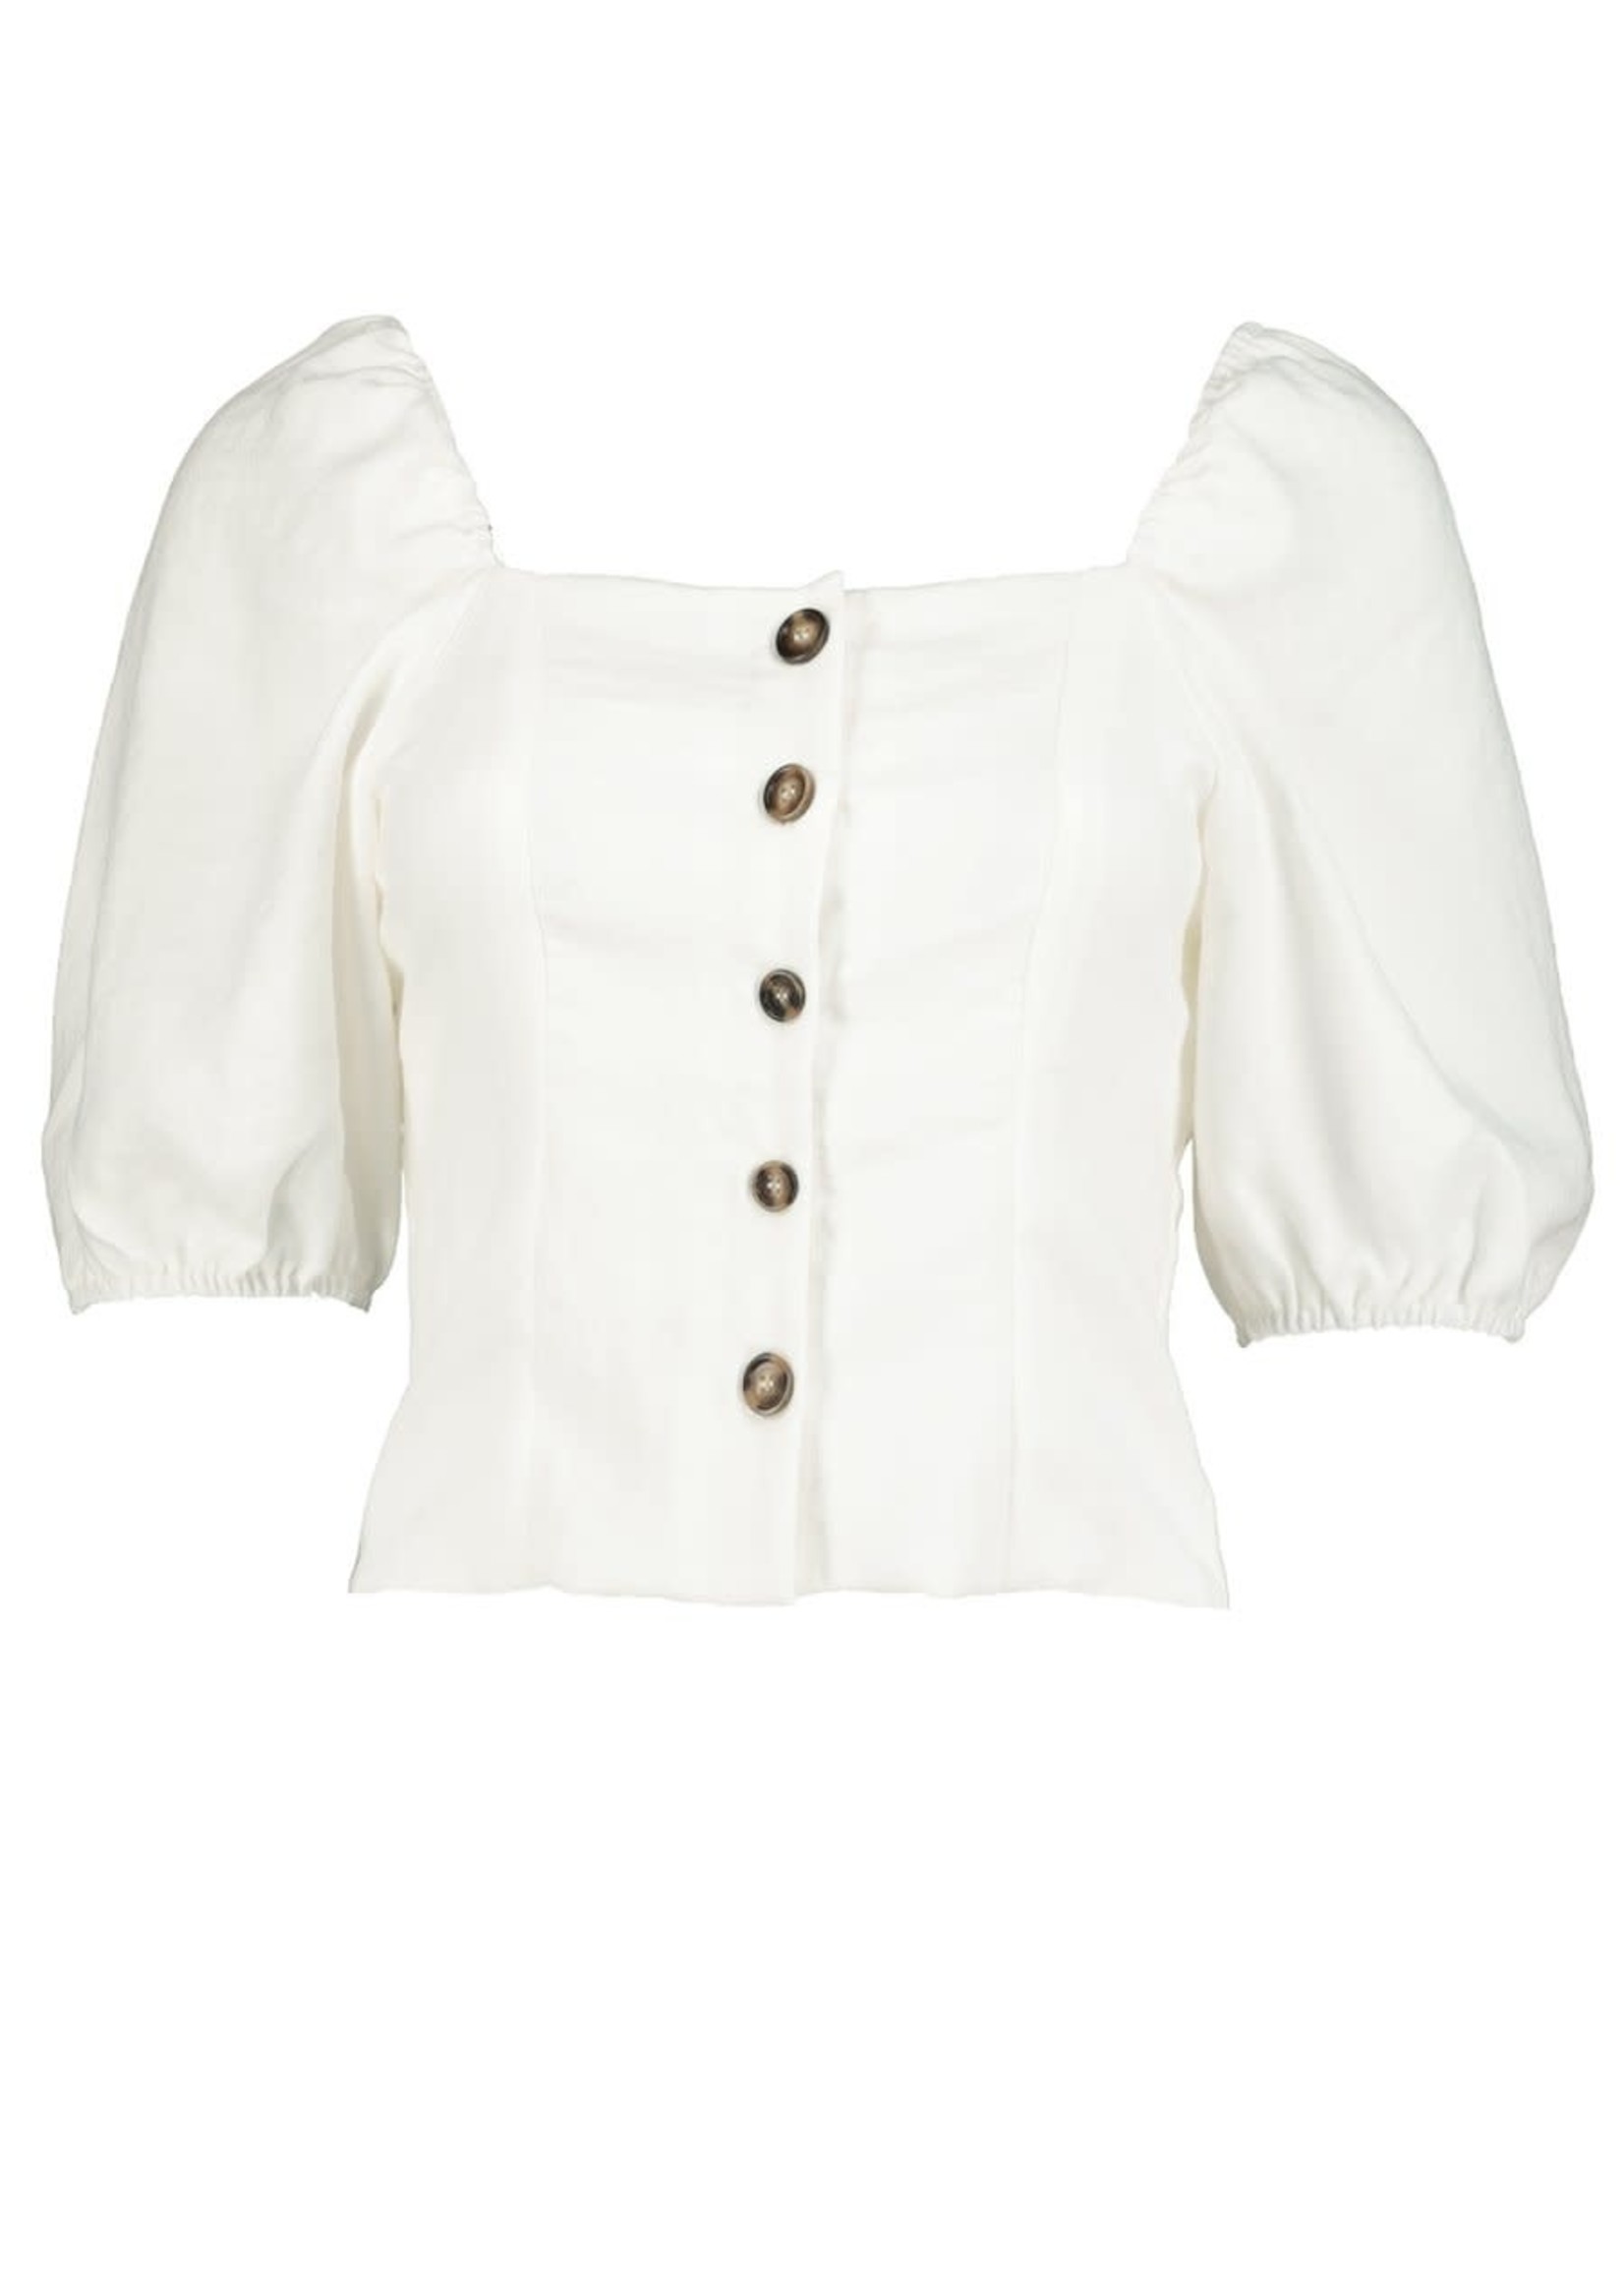 Bishop & Young. Sojourn Button Front Top